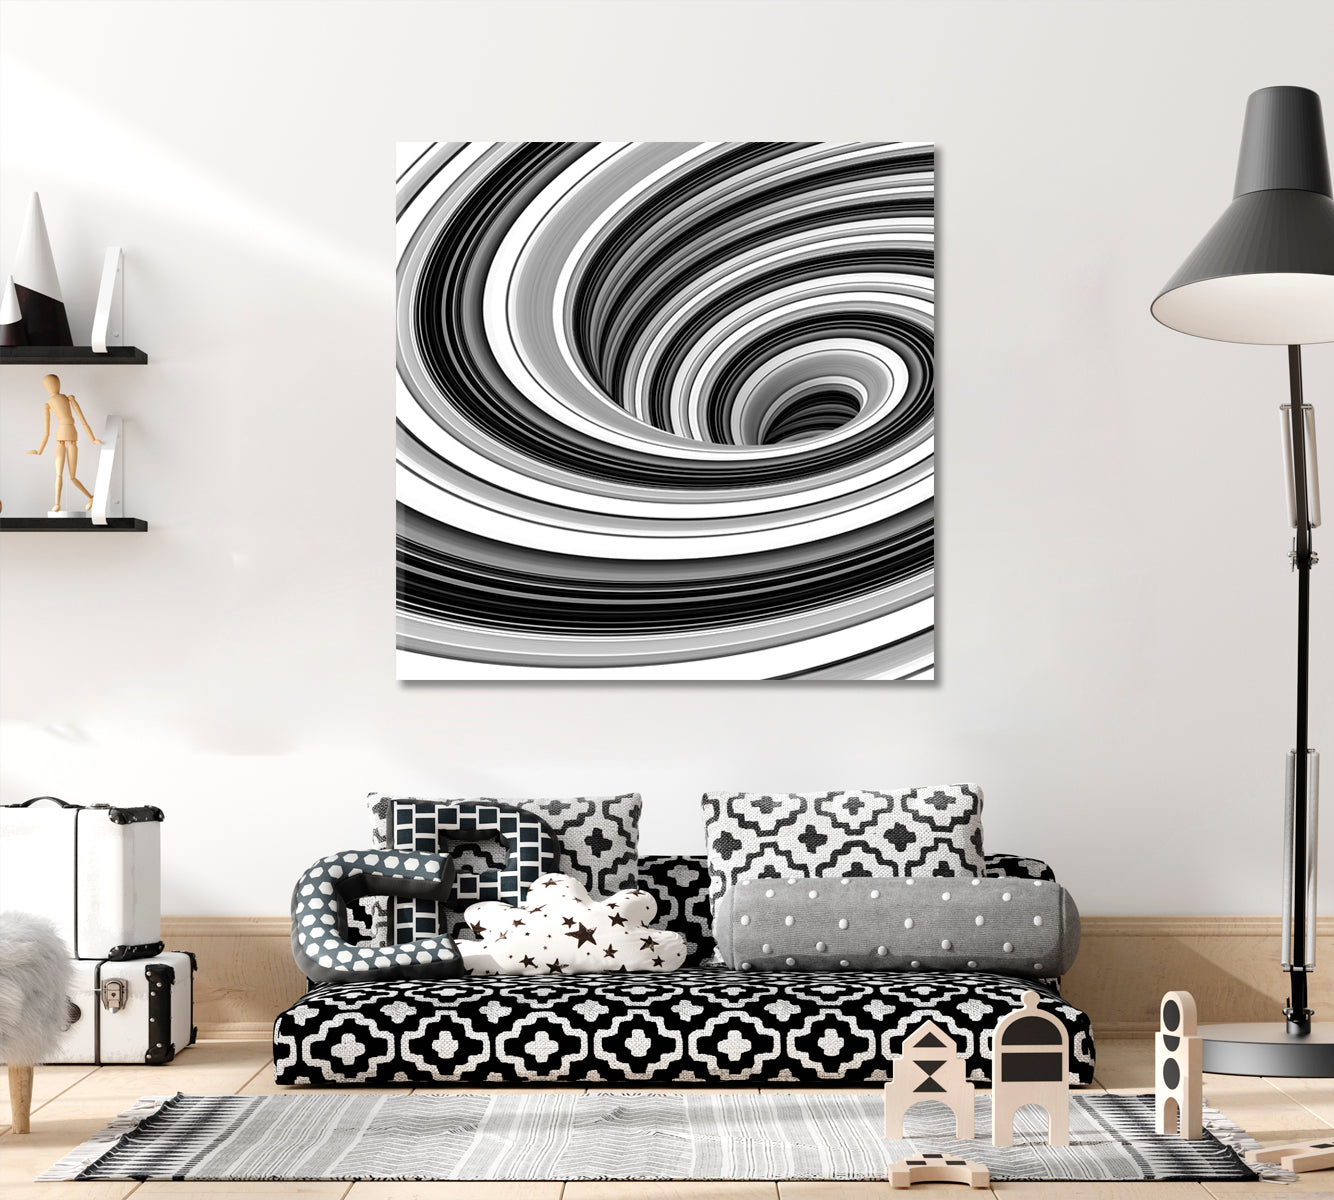 WHIRLPOOL Contrast Swirls Black And White Abstract Art Print Artesty 1 Panel 12"x12" 